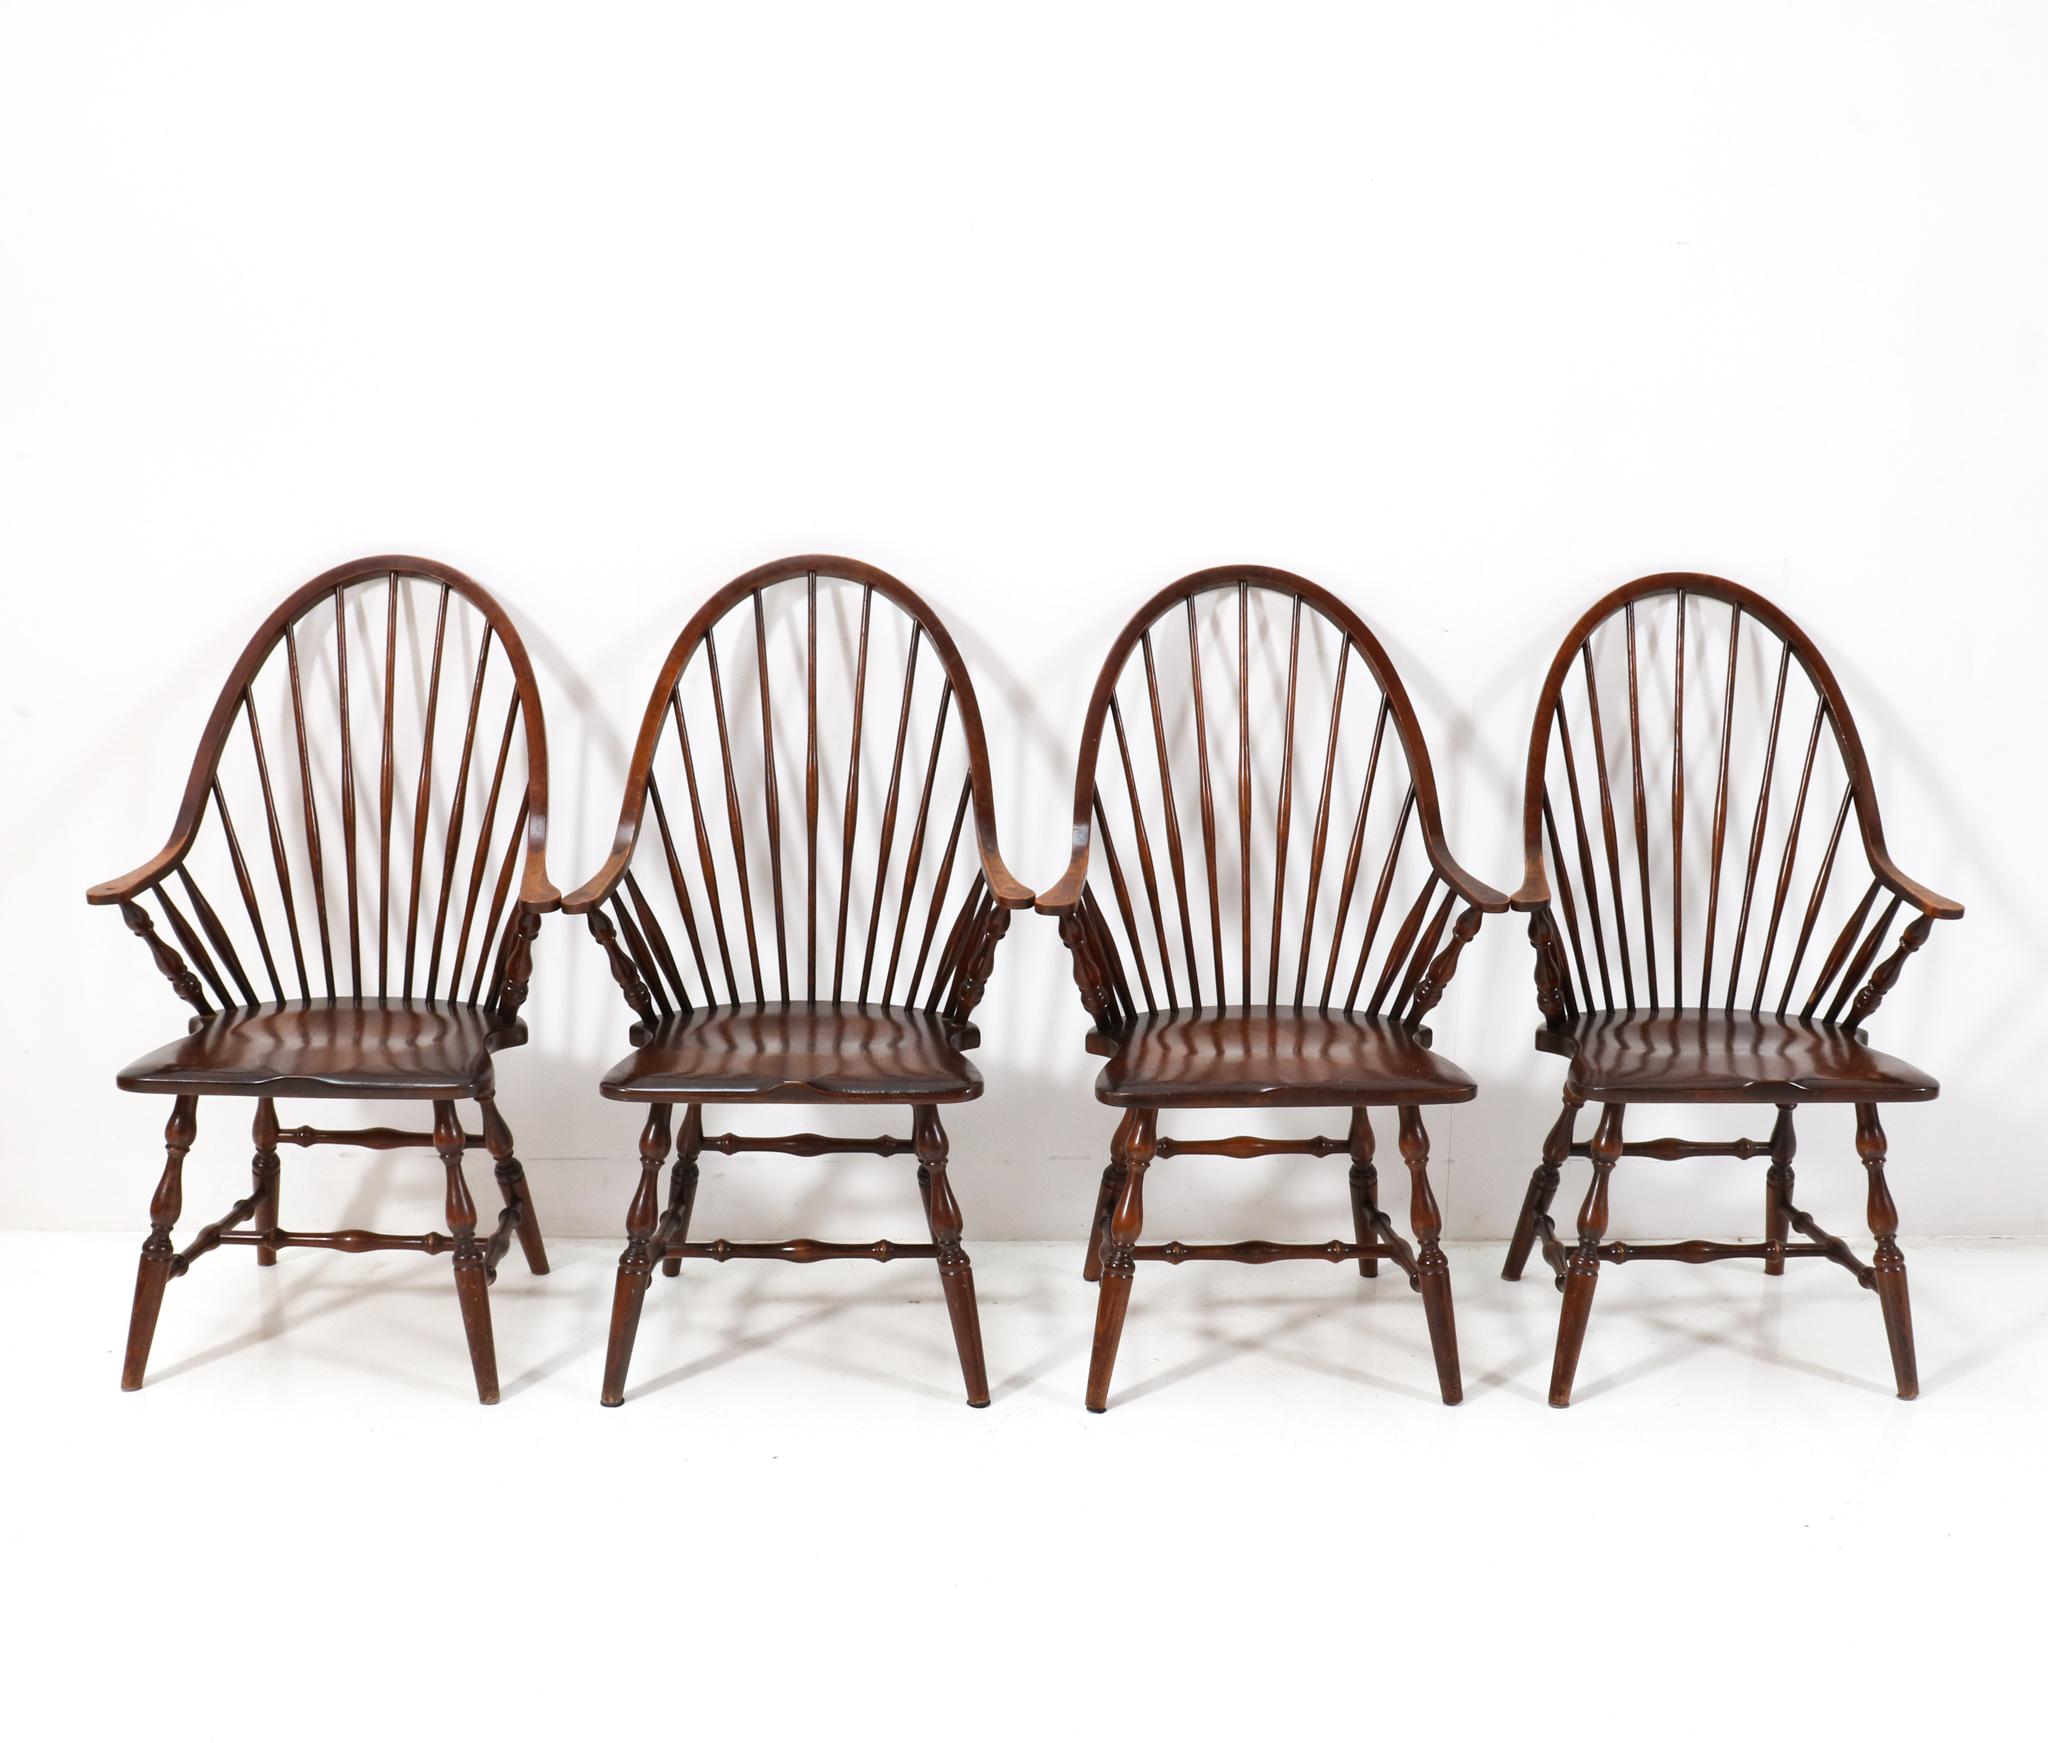 International Style Set of Four Tall Spindle Back Windsor Style Armchairs, 1960s